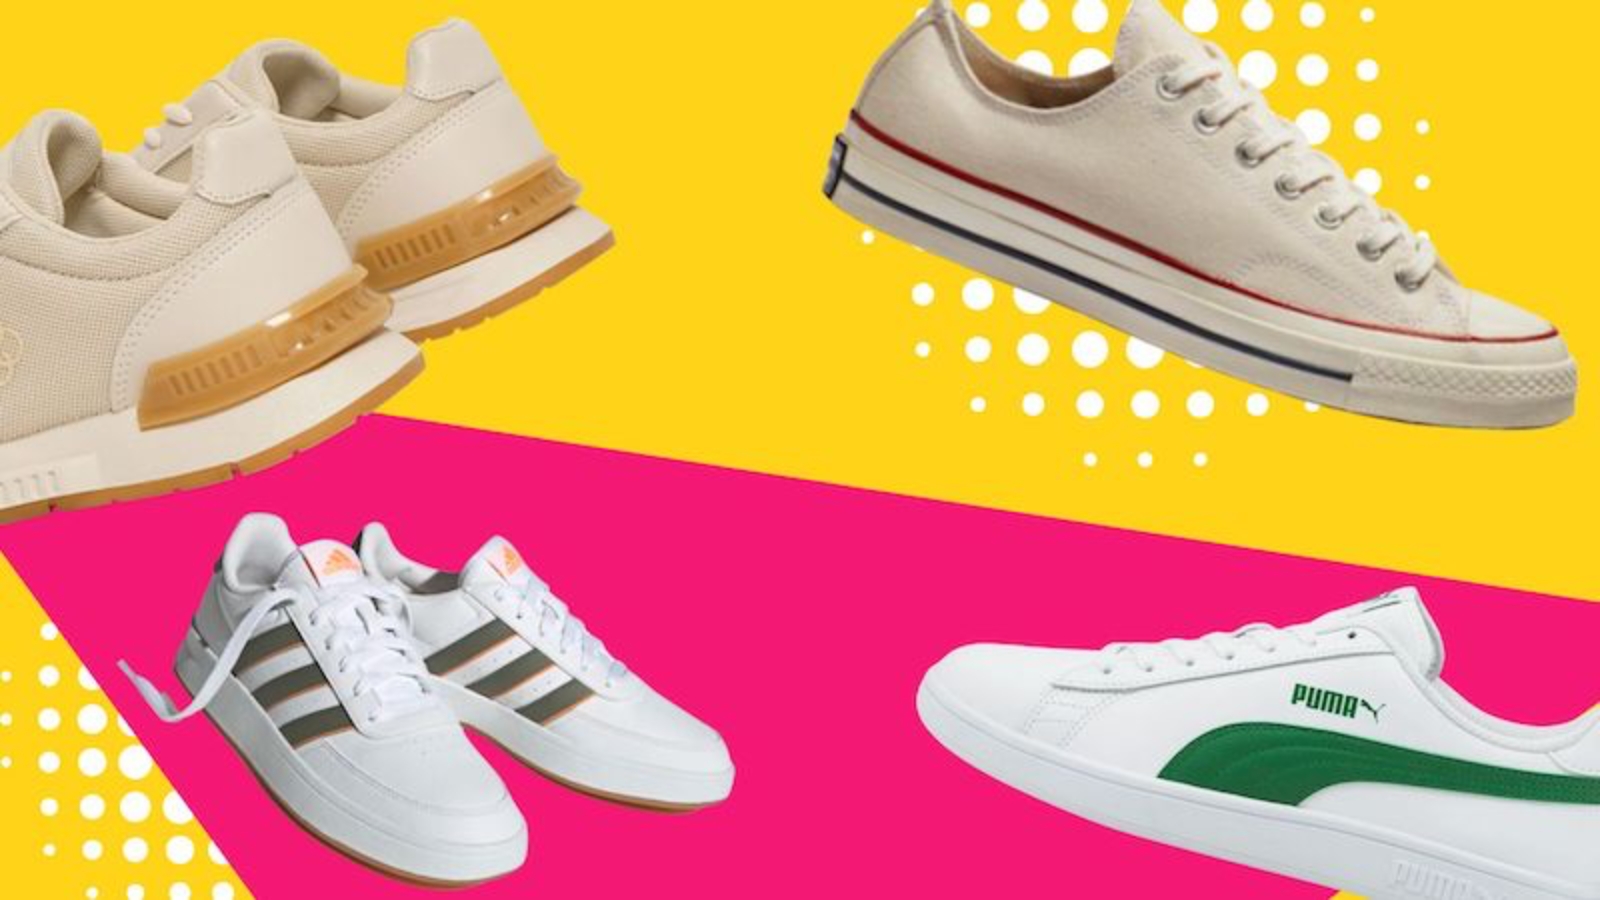 Top 7 Picks for Sneakers That Are below P5,000